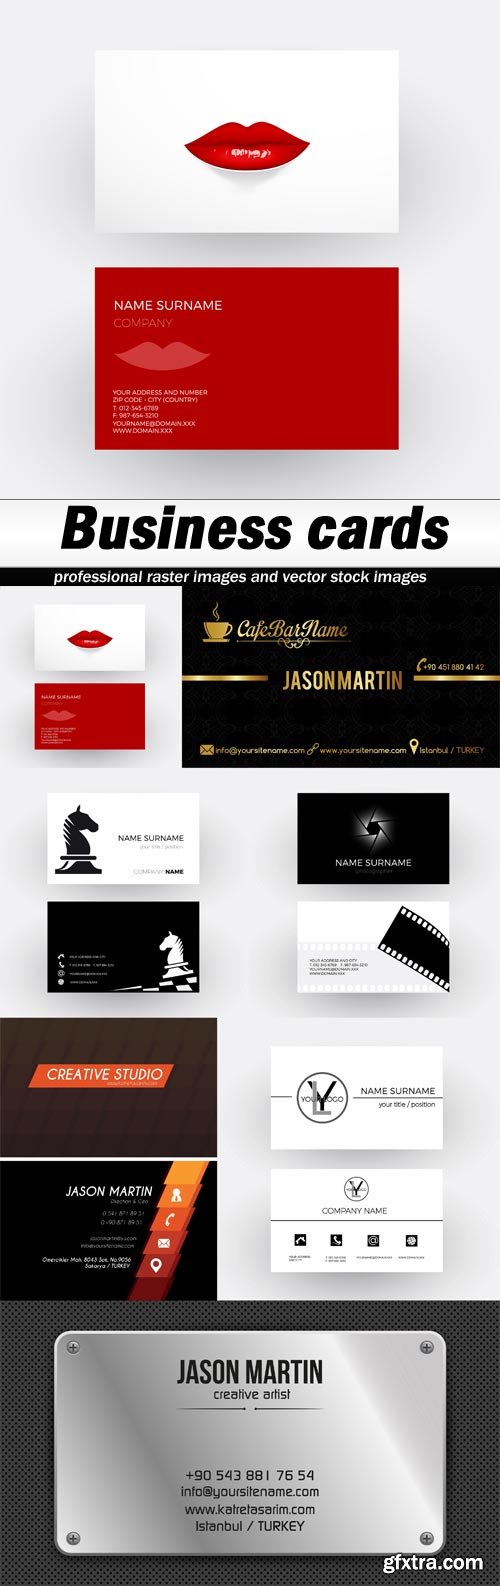 Business cards-7xEPS